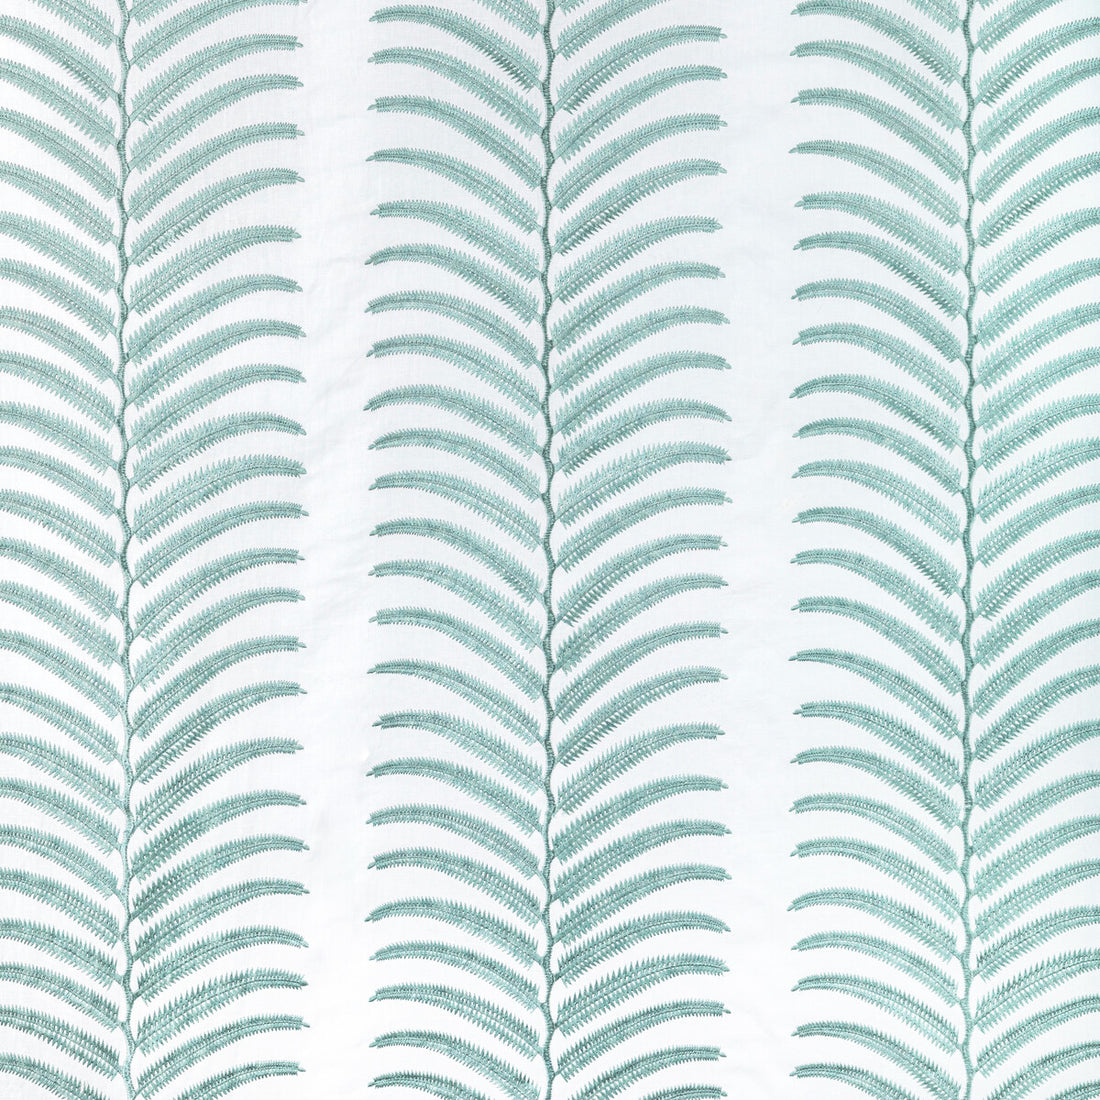 Plantae fabric in chambray color - pattern 36344.15.0 - by Kravet Couture in the Modern Luxe III collection